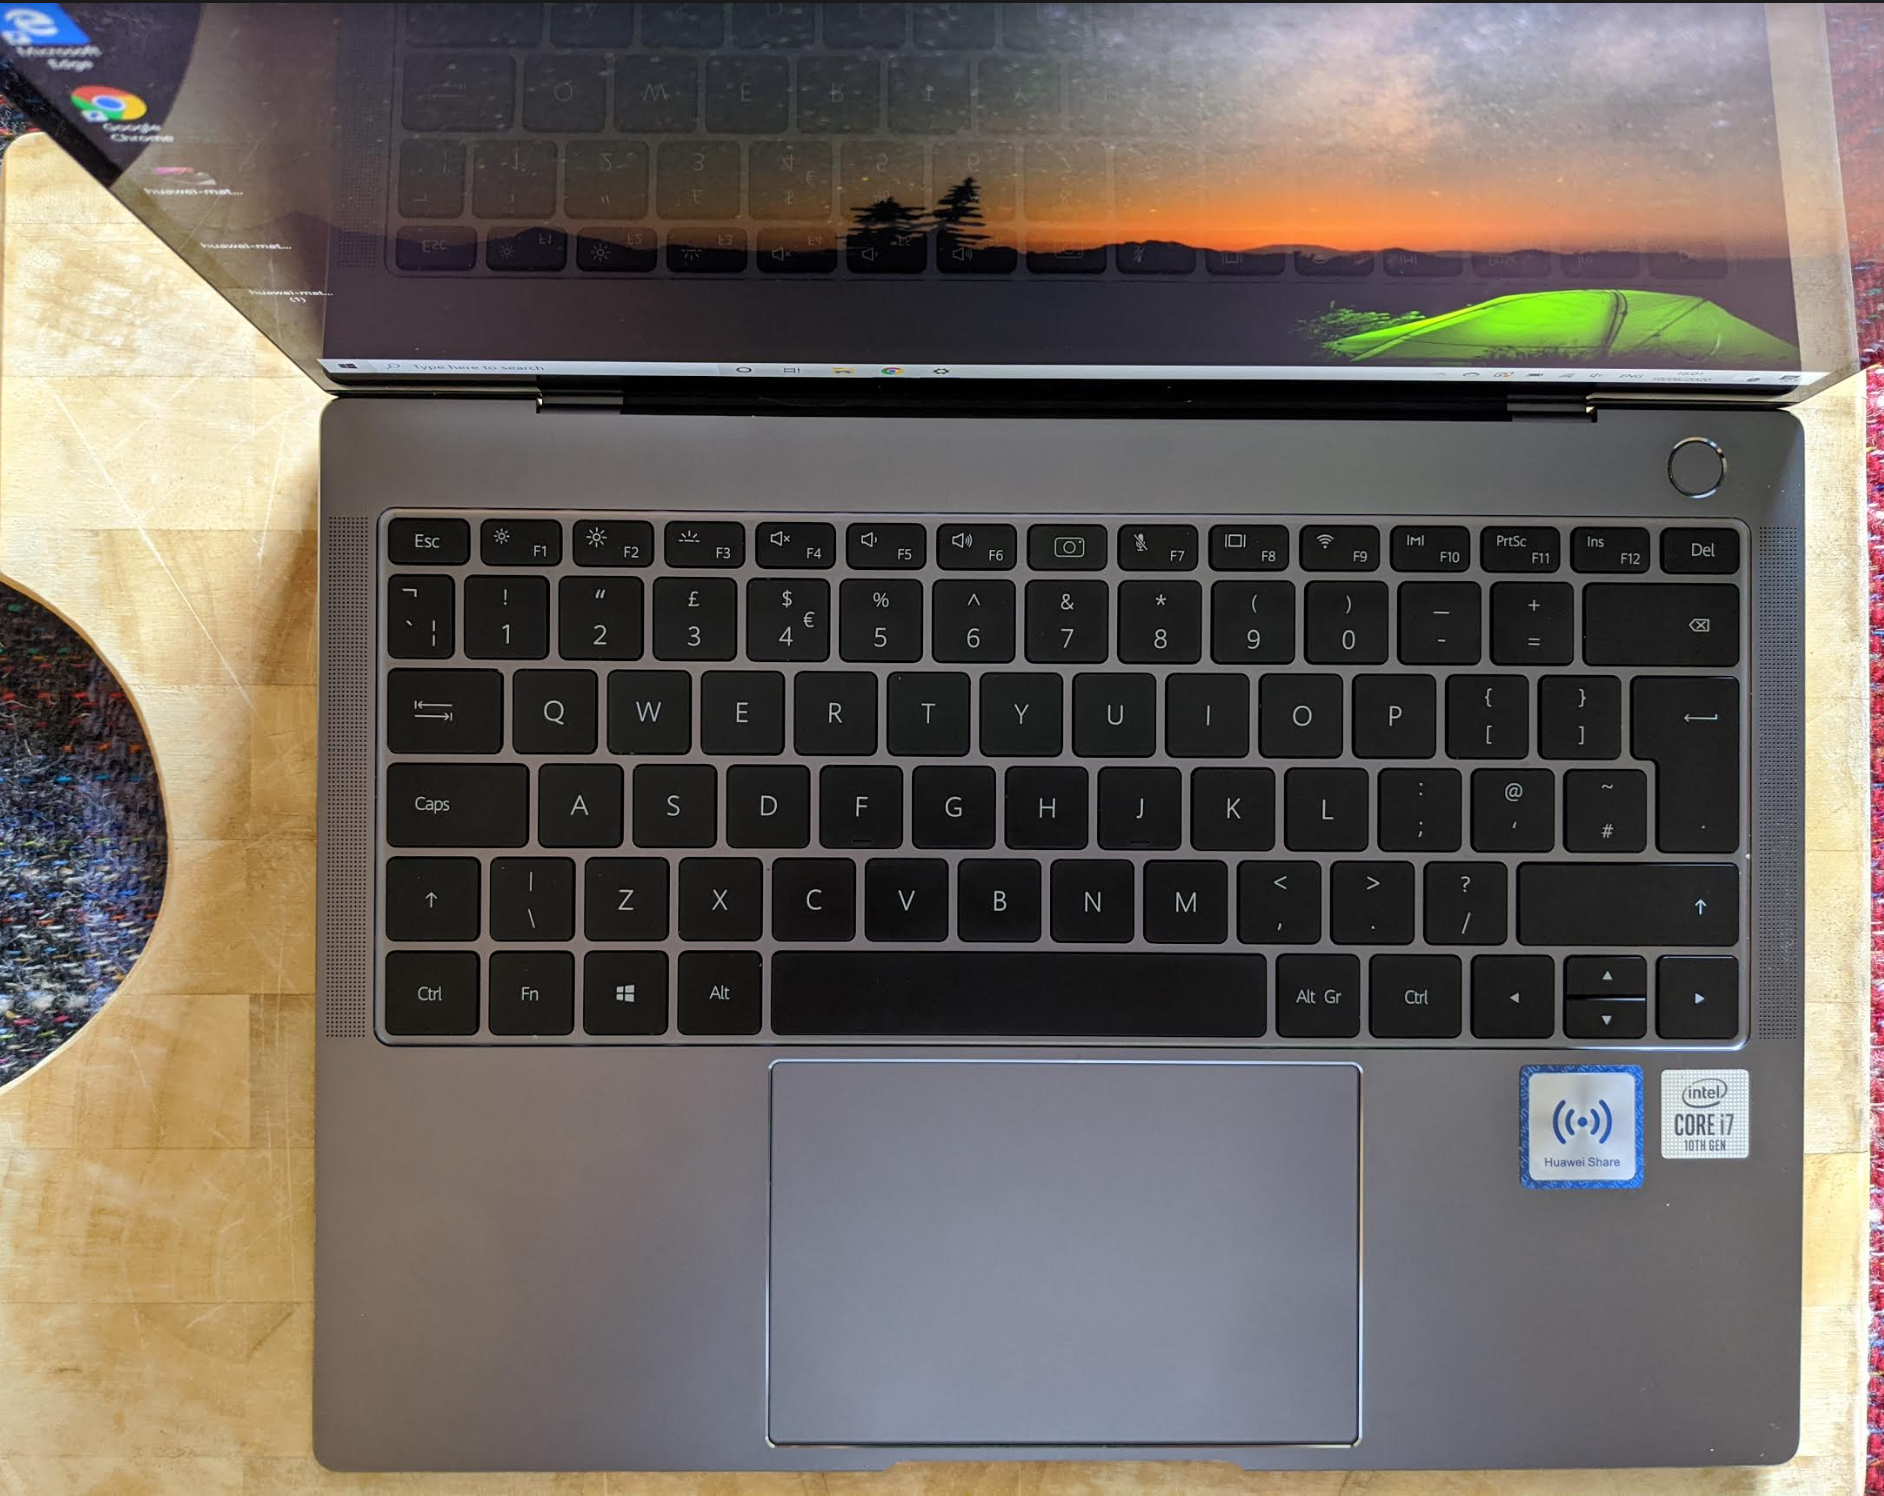 Huawei Matebook Pro Review: A Stunning Windows Laptop with One Potentially Fatal Flaw